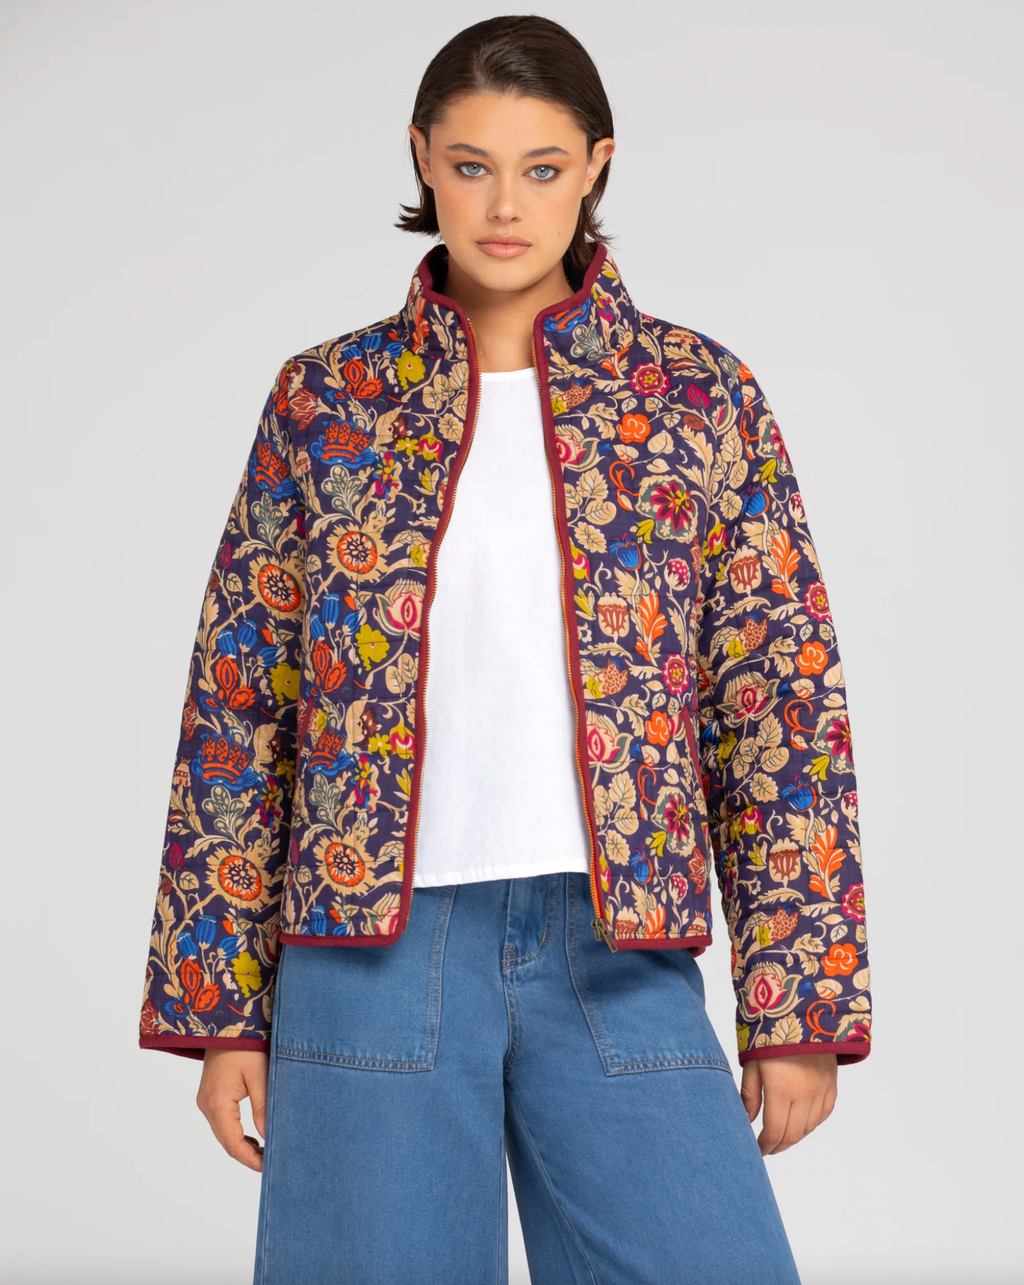 the cella quilted jacket by boom shankar is a cotton block printed boho floral zip up cotton jacket online at jipsi cartel